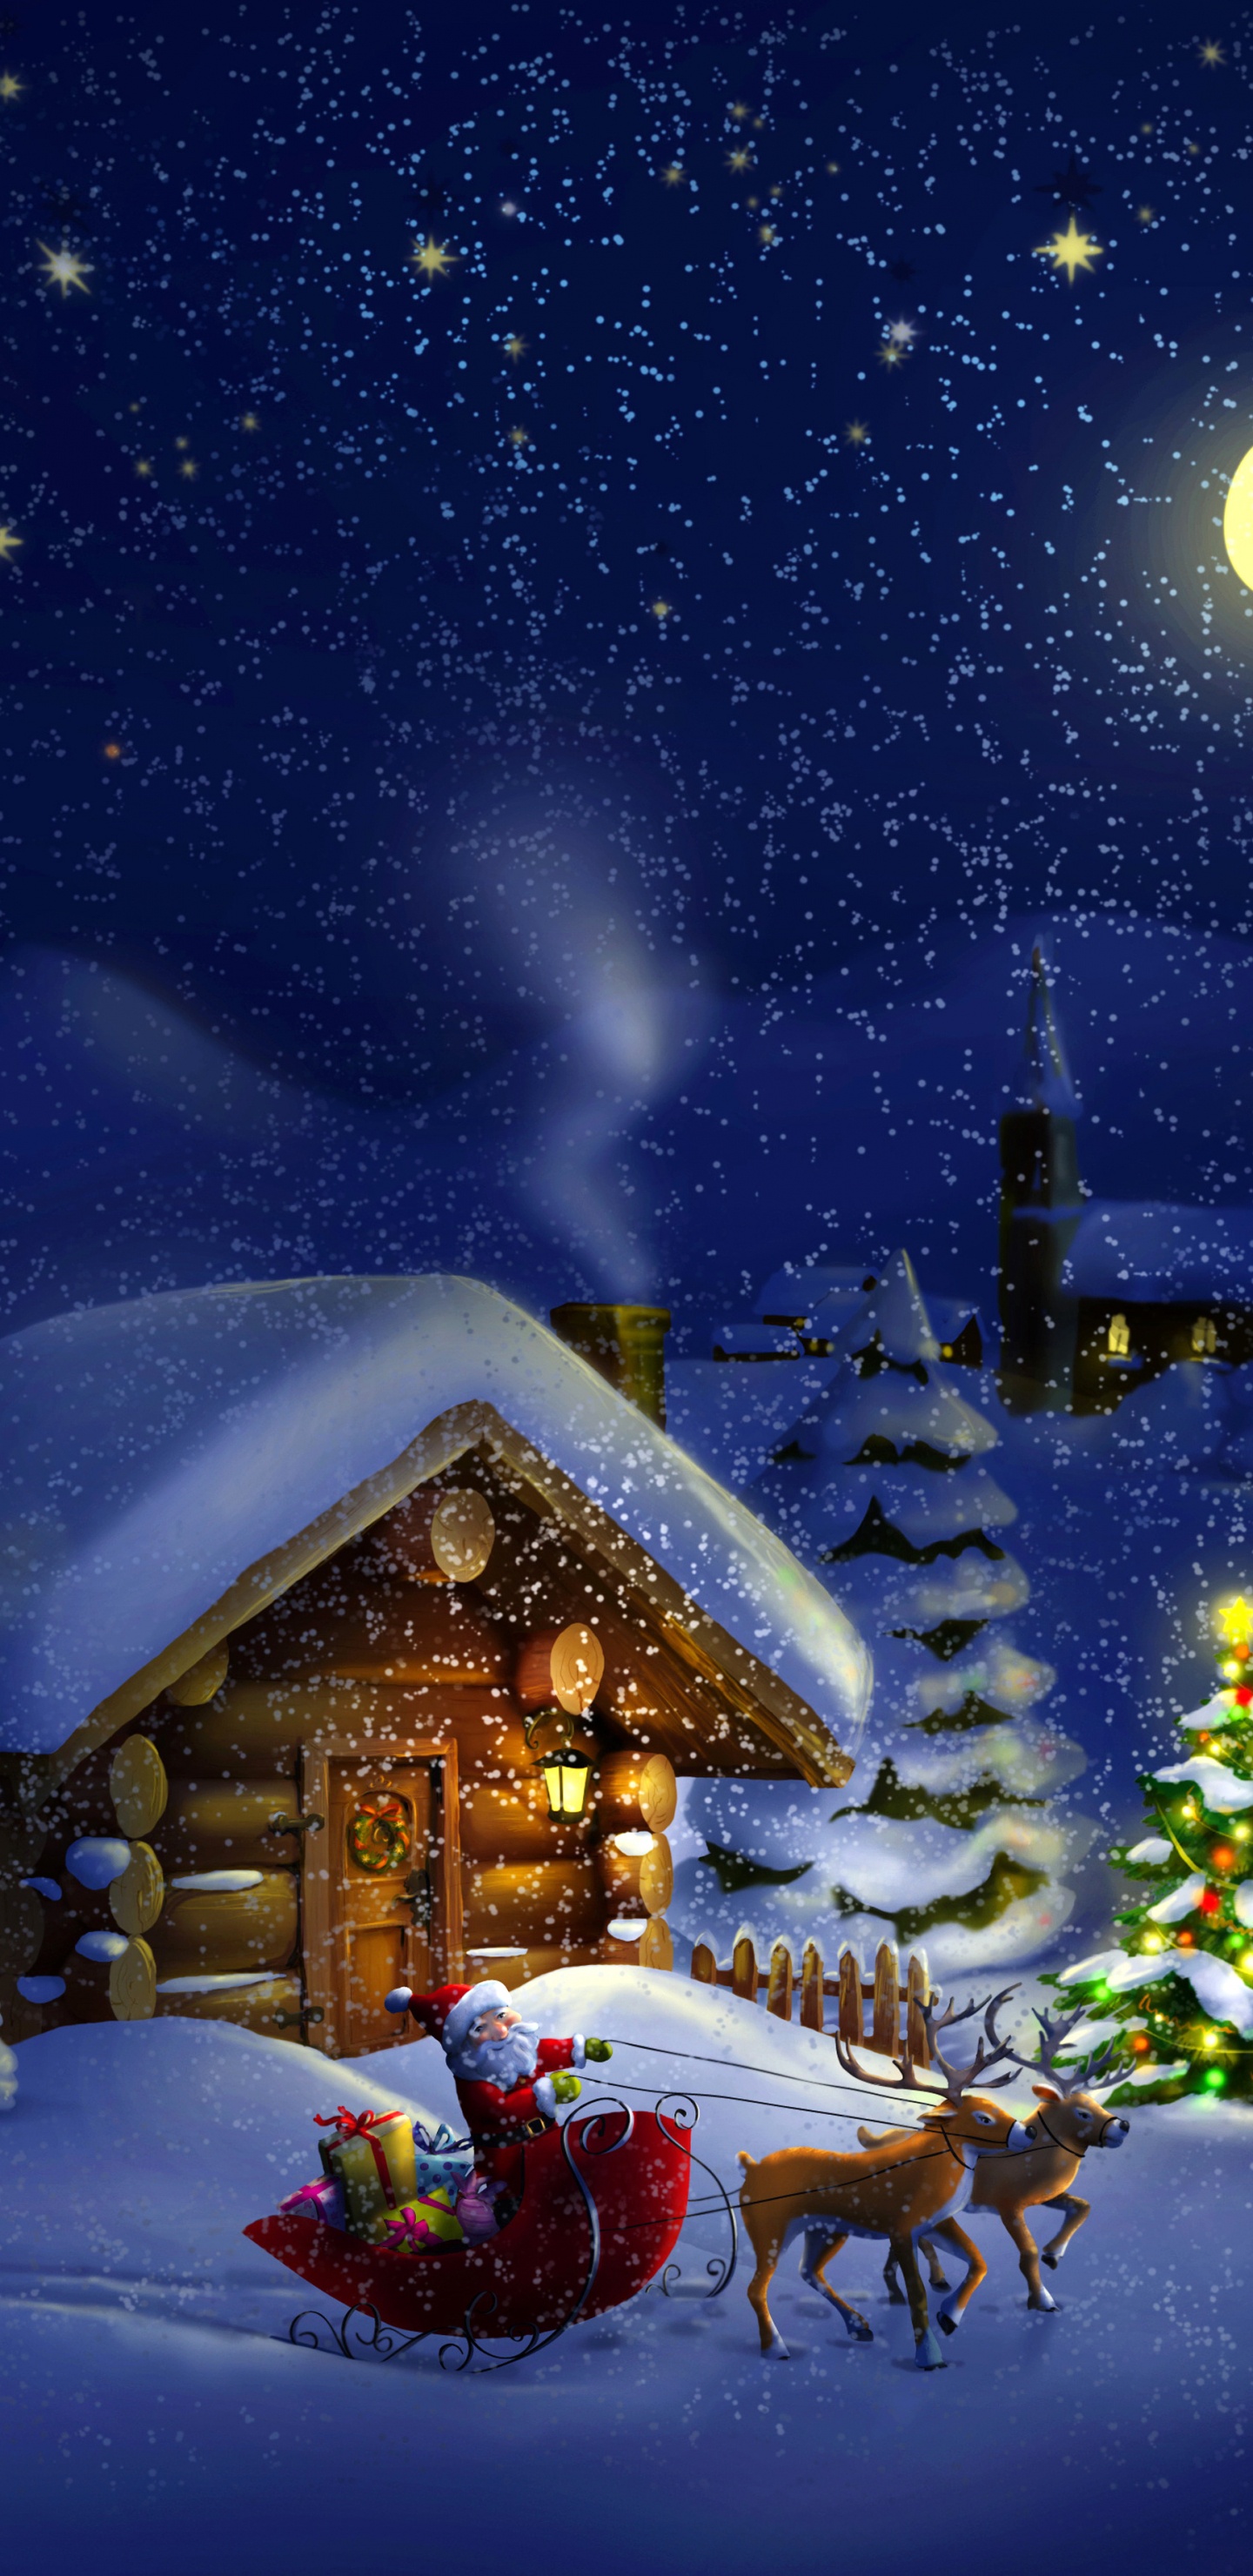 Christmas Day, Santa Claus, Holiday, Winter, Snow. Wallpaper in 1440x2960 Resolution